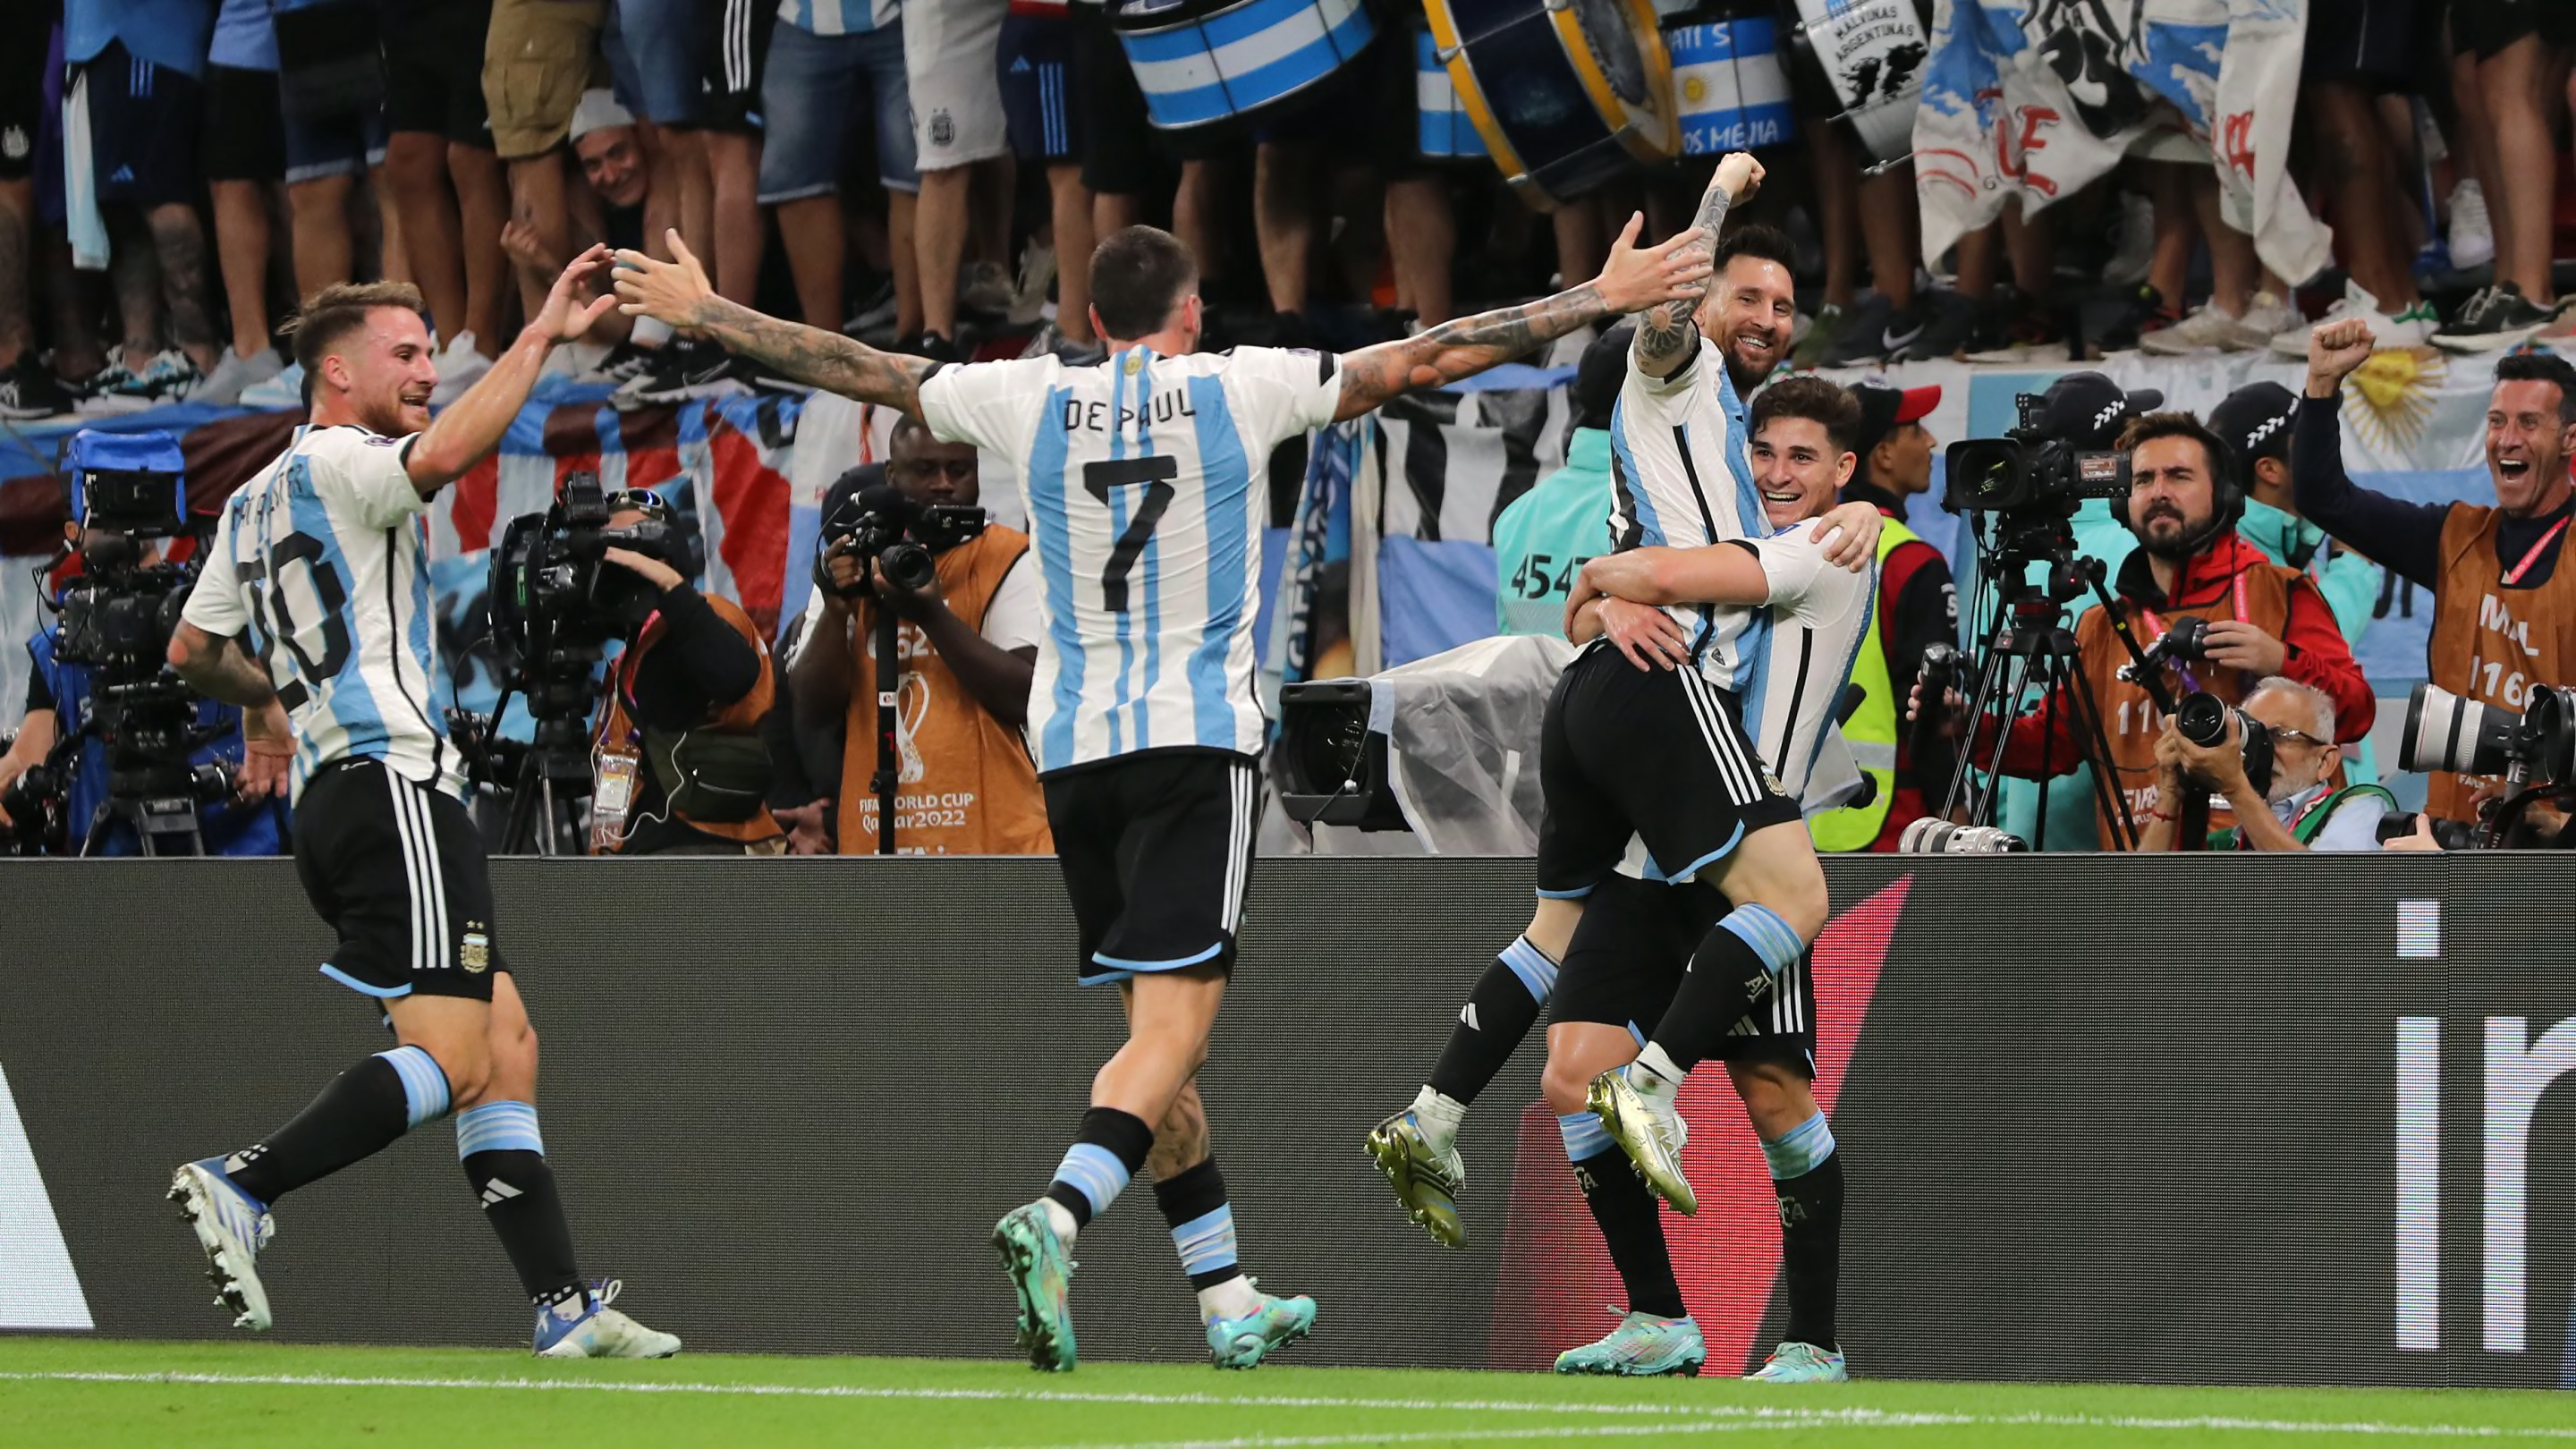 Argentina 2-1 Australia: Player ratings as Messi guides Albiceleste into World Cup quarter-finals